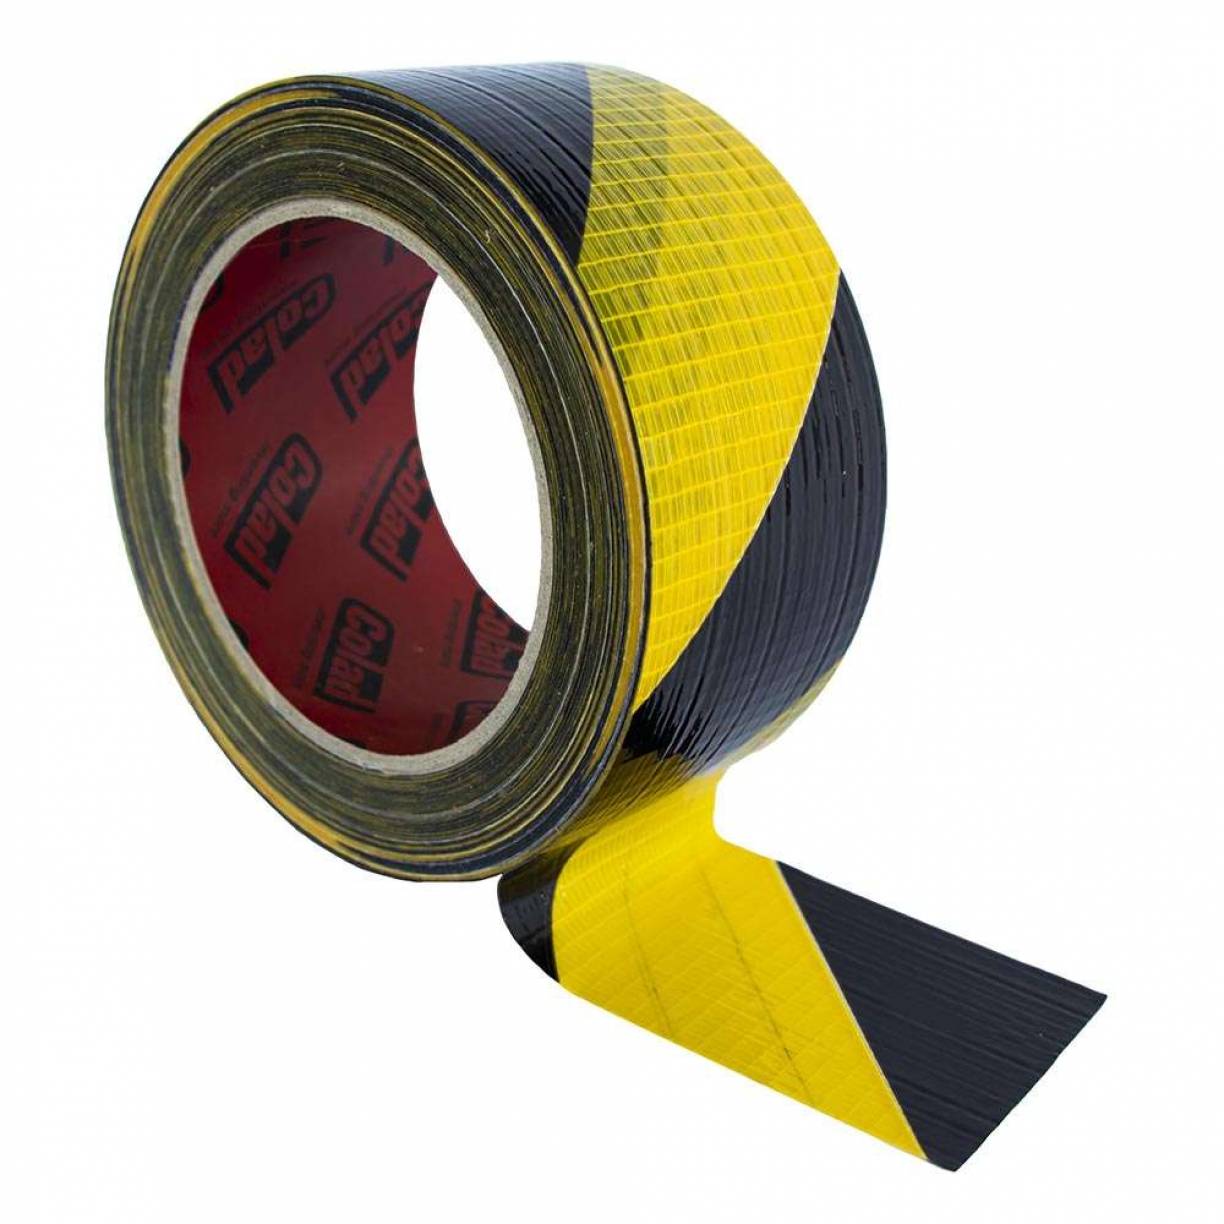 ACRATS Introduces the New Hazard Tape Are you looking for a durable and weather-resistant marking tape to indicate distance and mark walking routes and workspaces? Then order your Colad Hazard Tape now!